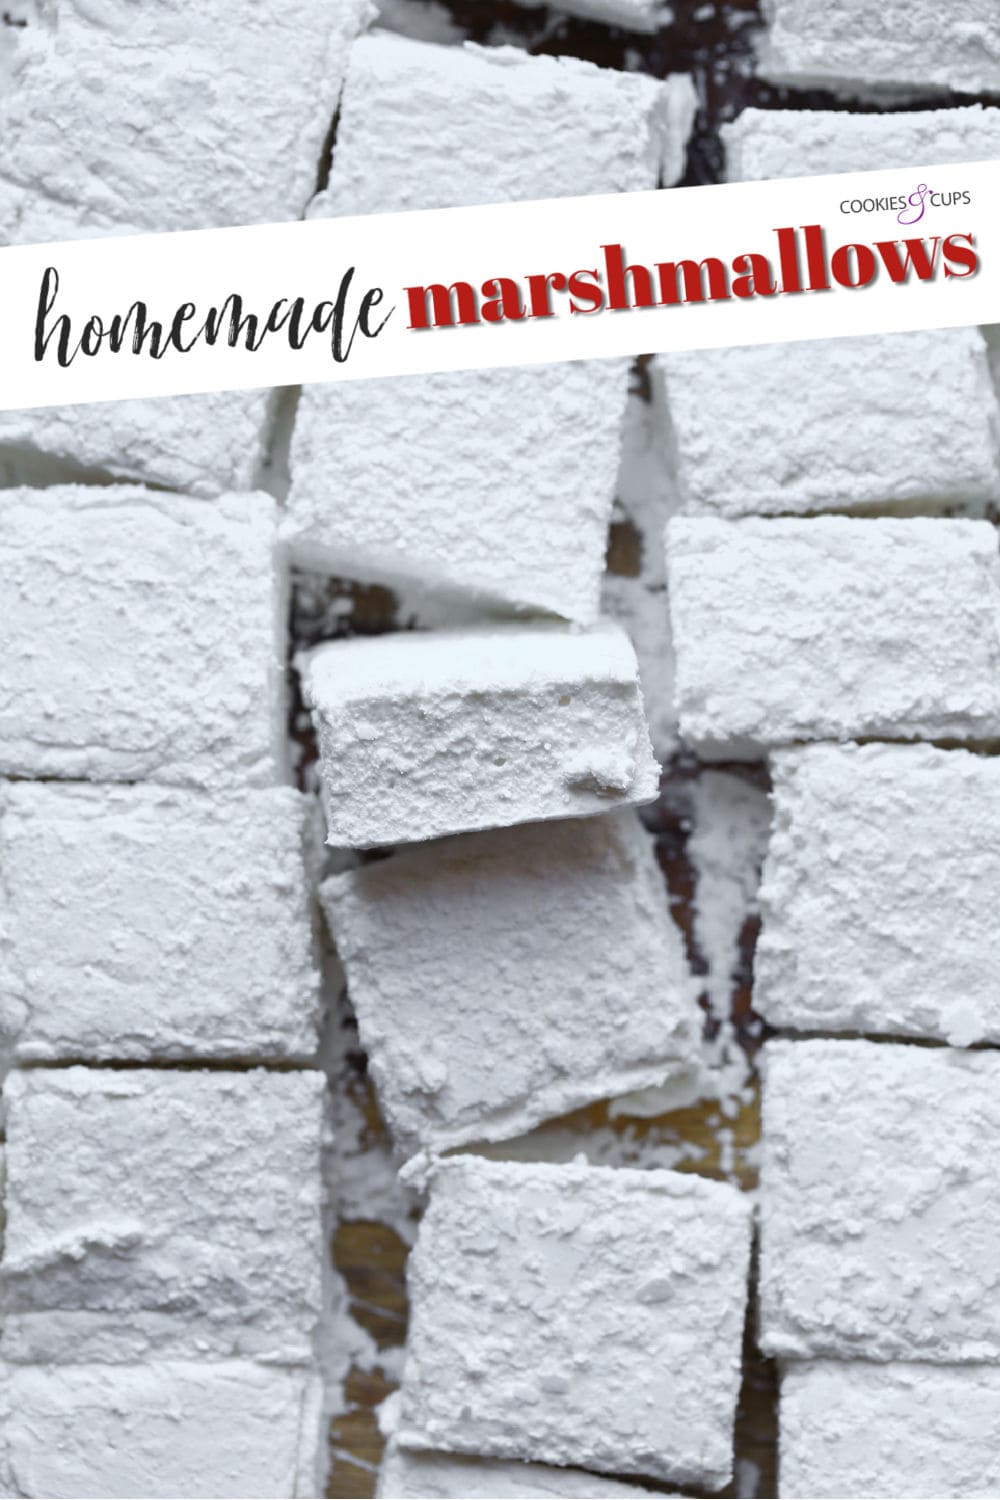 Fifteen Large Homemade Marshmallows With a Text Overlay Introducing Them